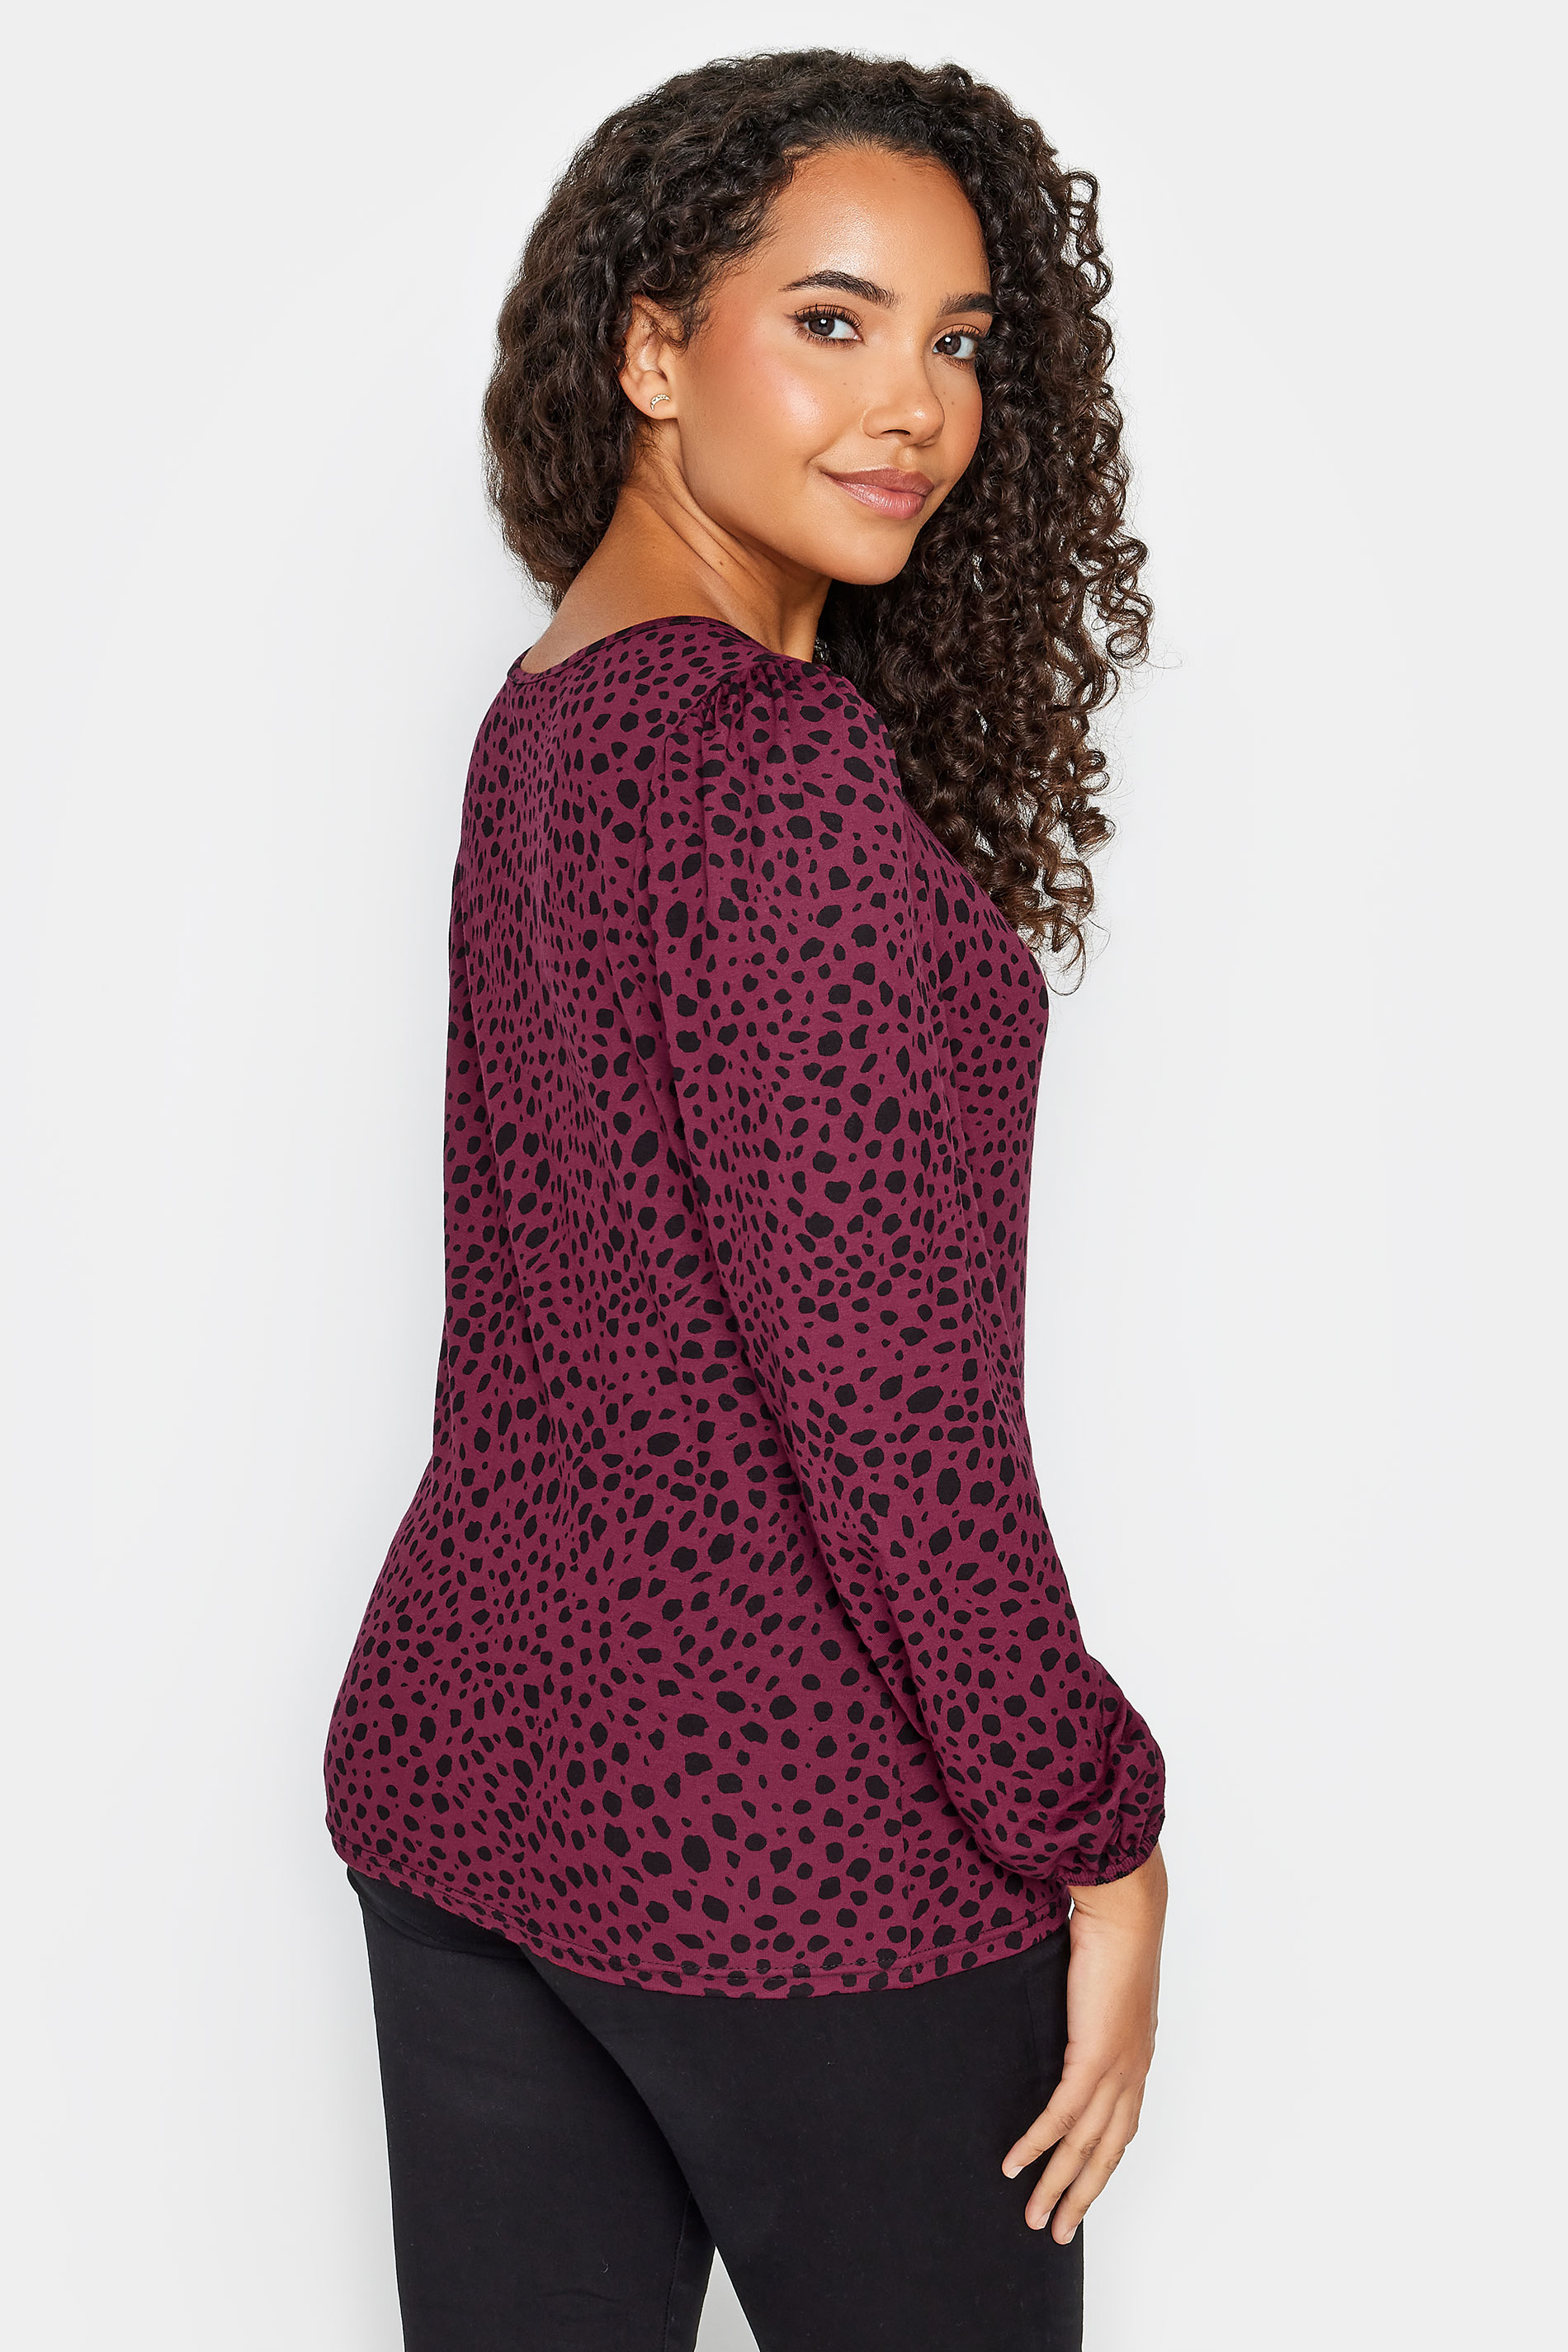 M&Co Red Spot Print Balloon Sleeve Top | M&Co 3